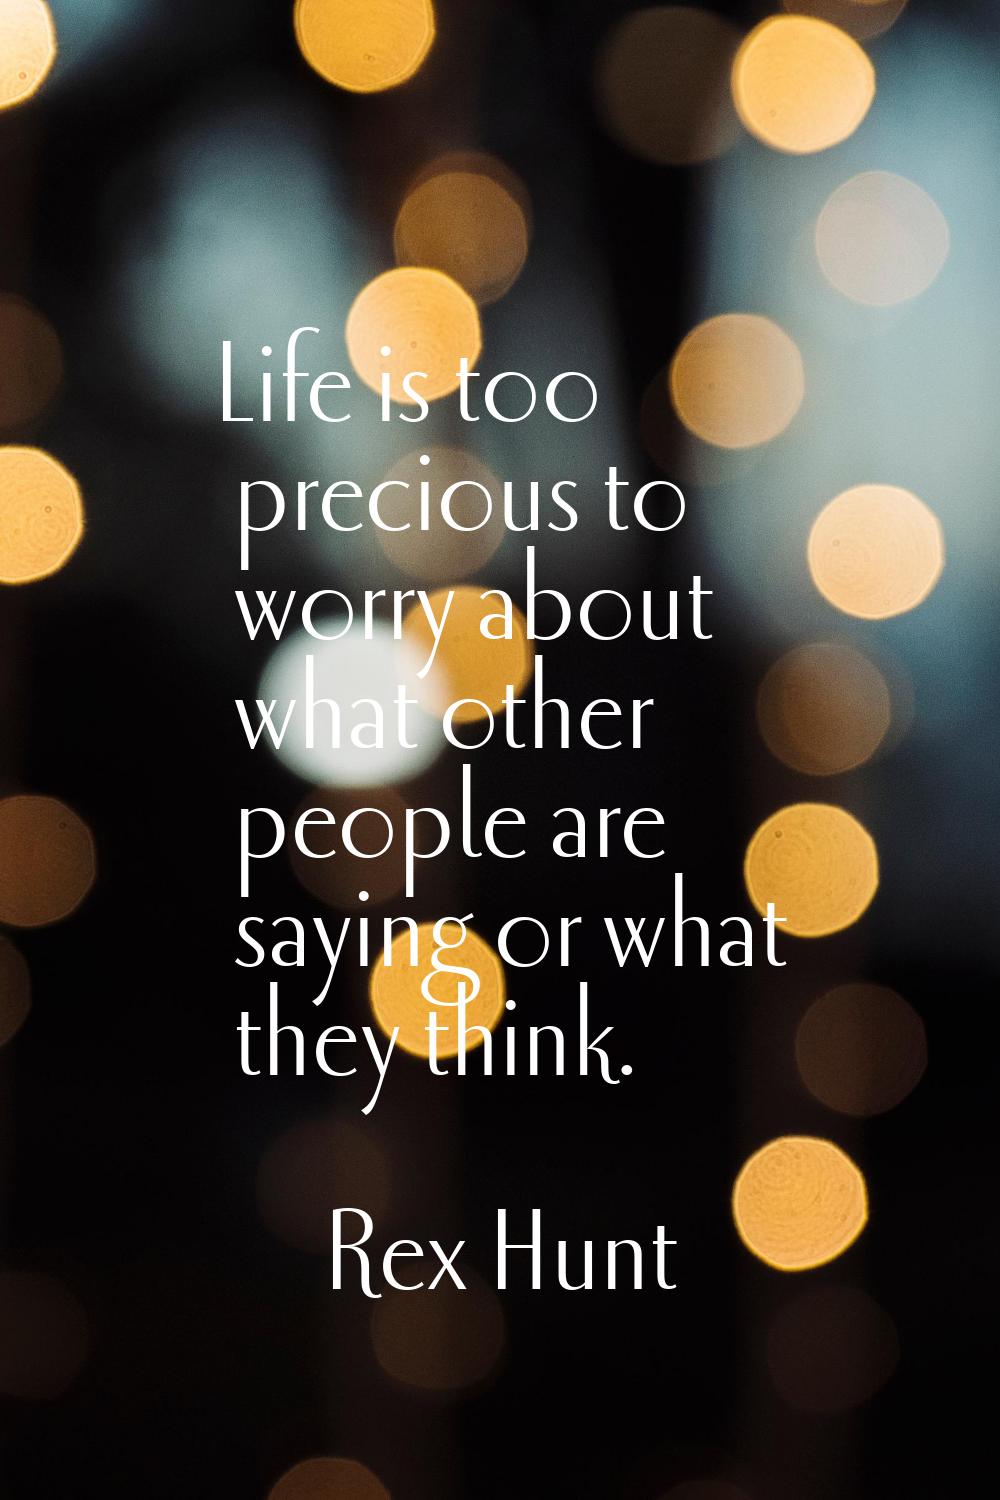 Life is too precious to worry about what other people are saying or what they think.